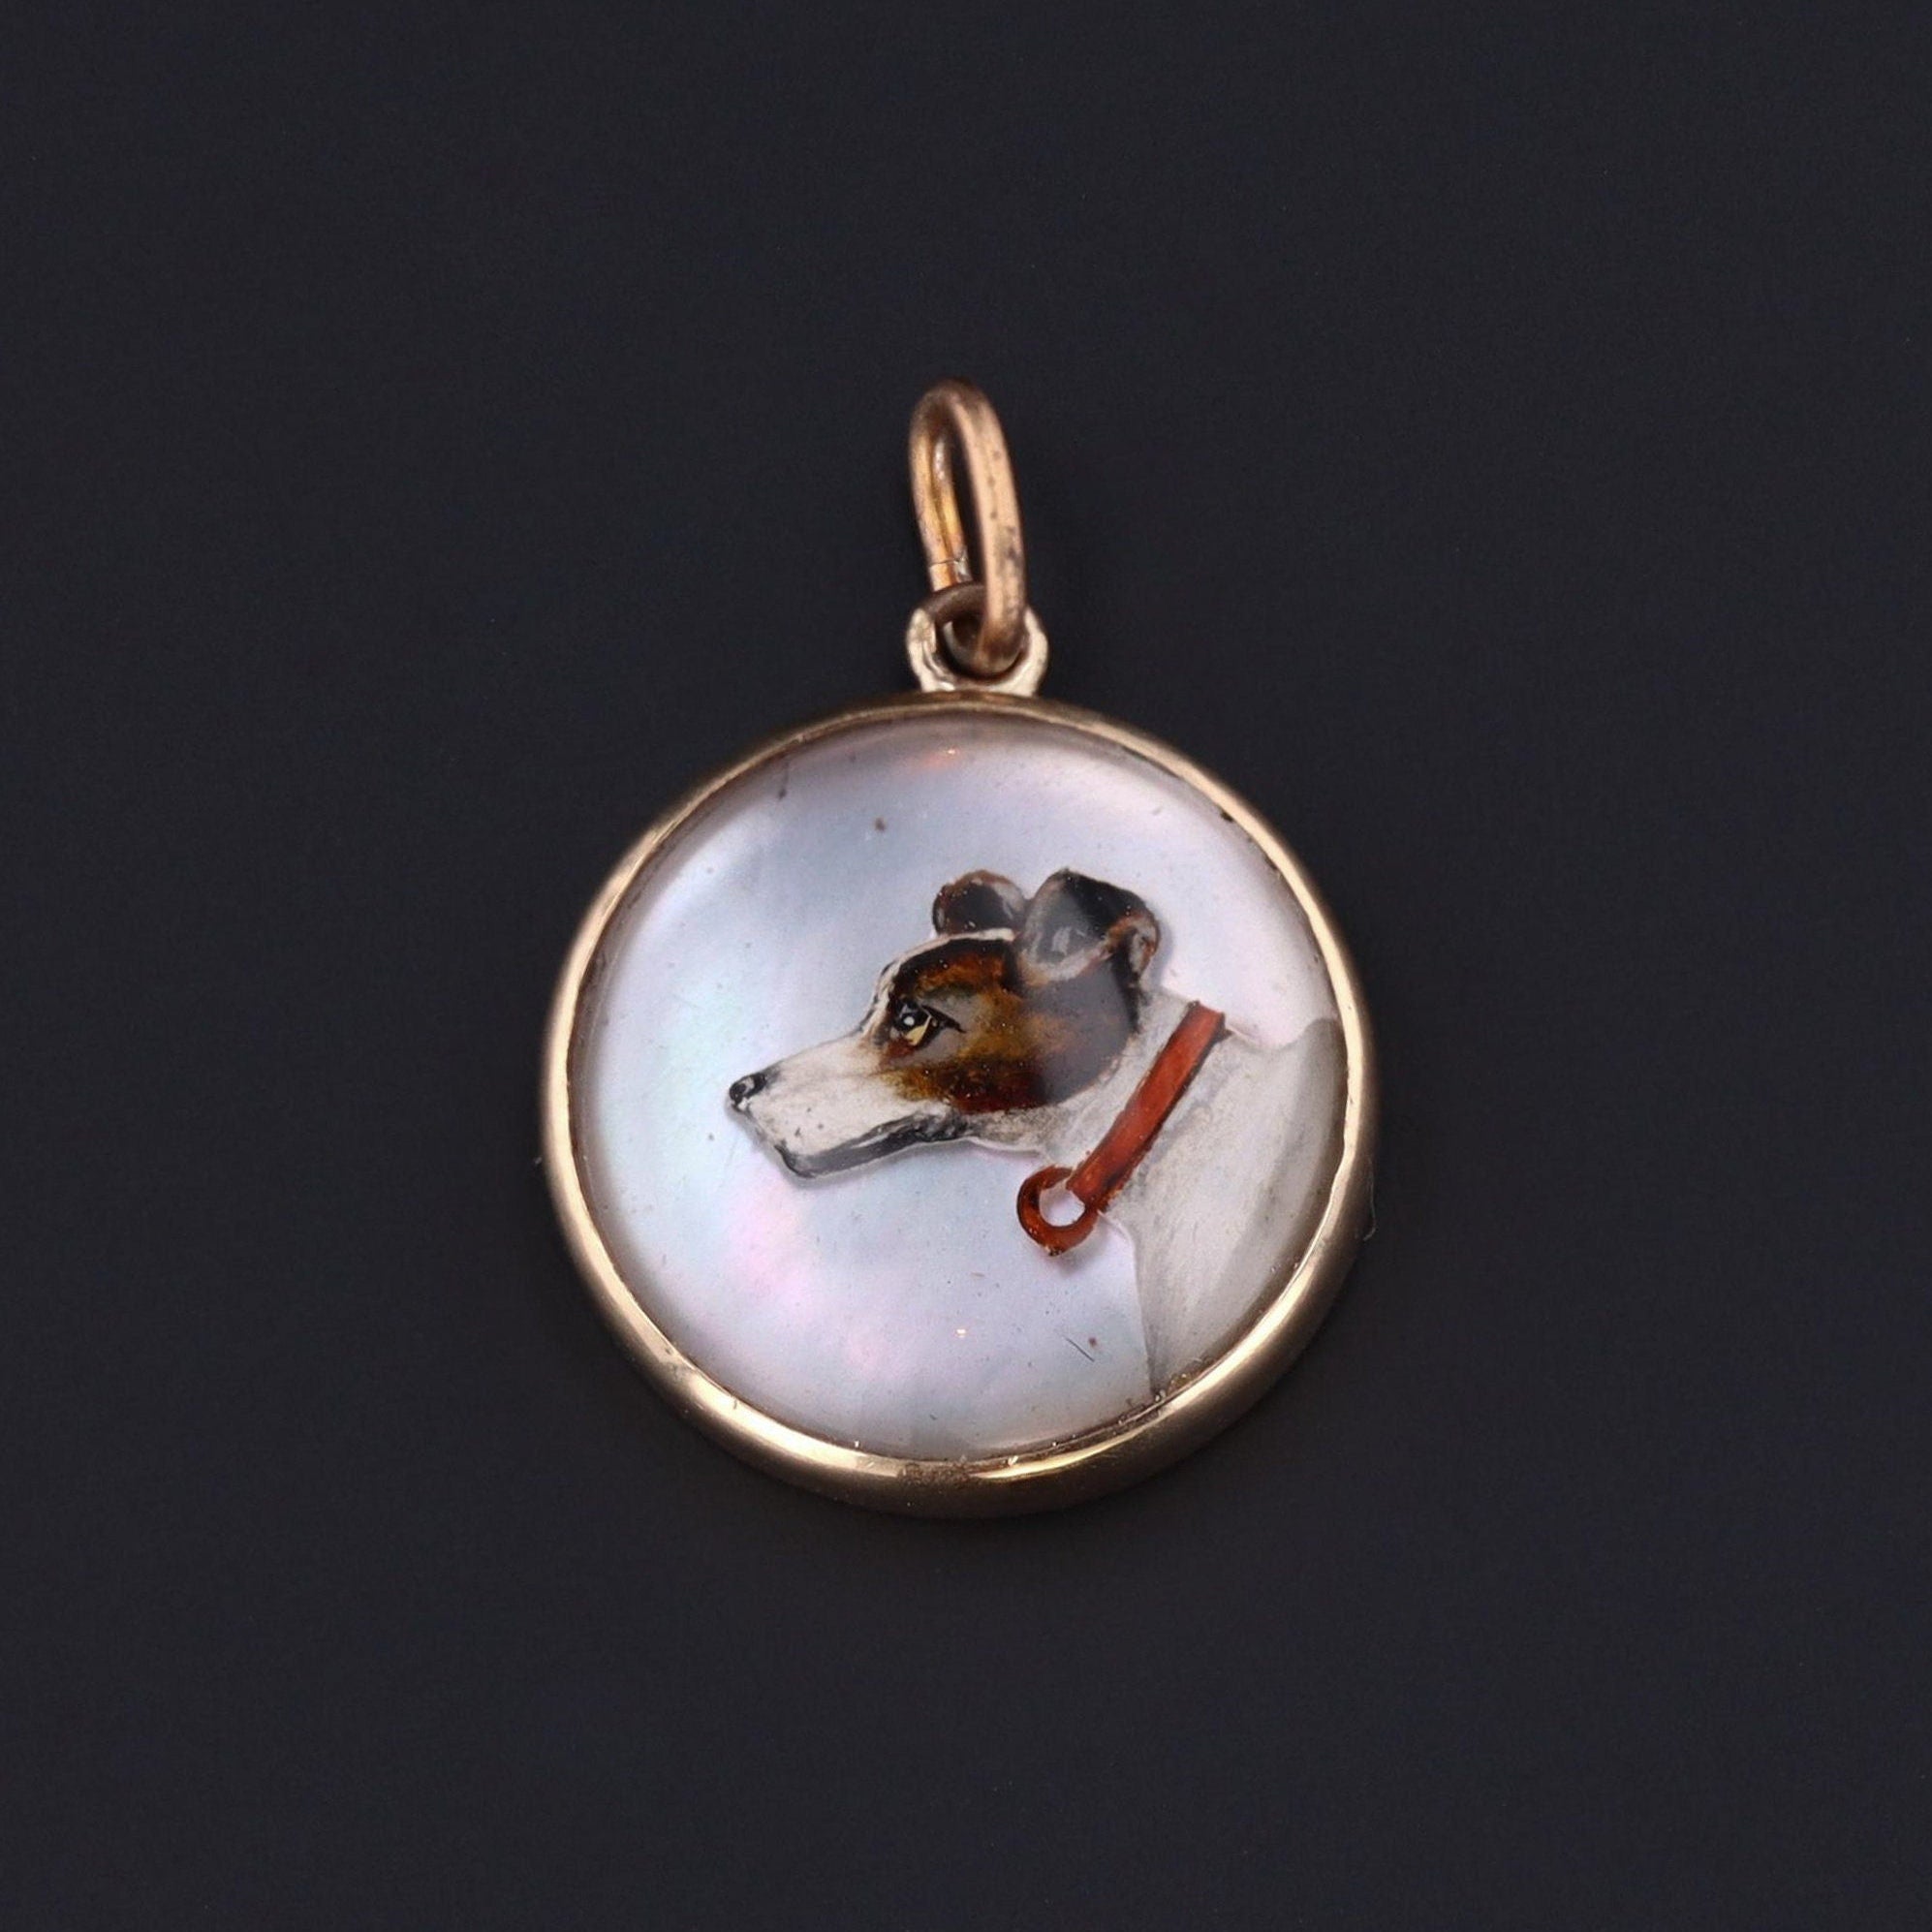 Antique Dog Charm | Reverse Painted Crystal Dog Charm 